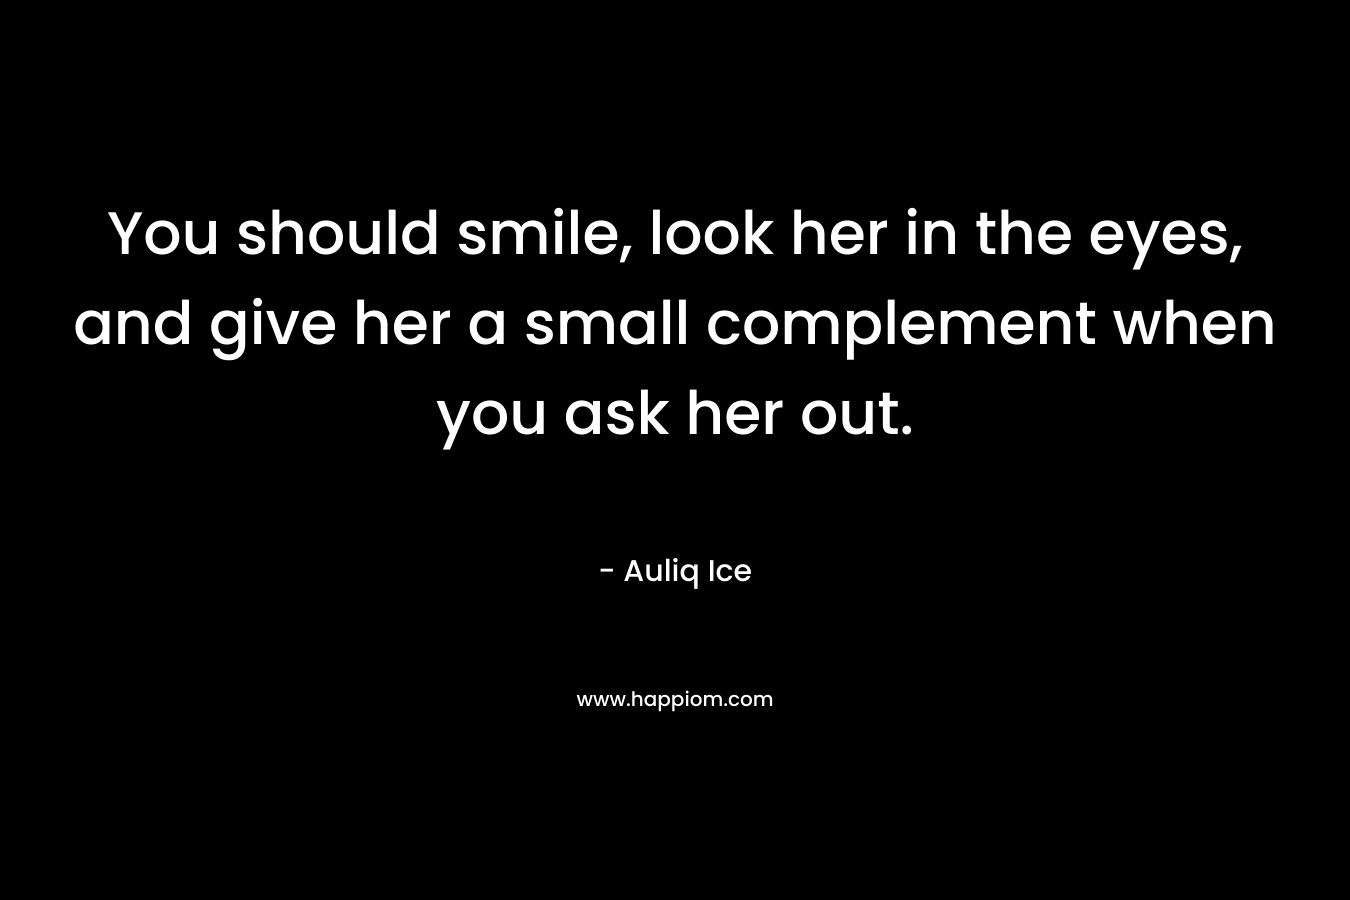 You should smile, look her in the eyes, and give her a small complement when you ask her out. – Auliq Ice